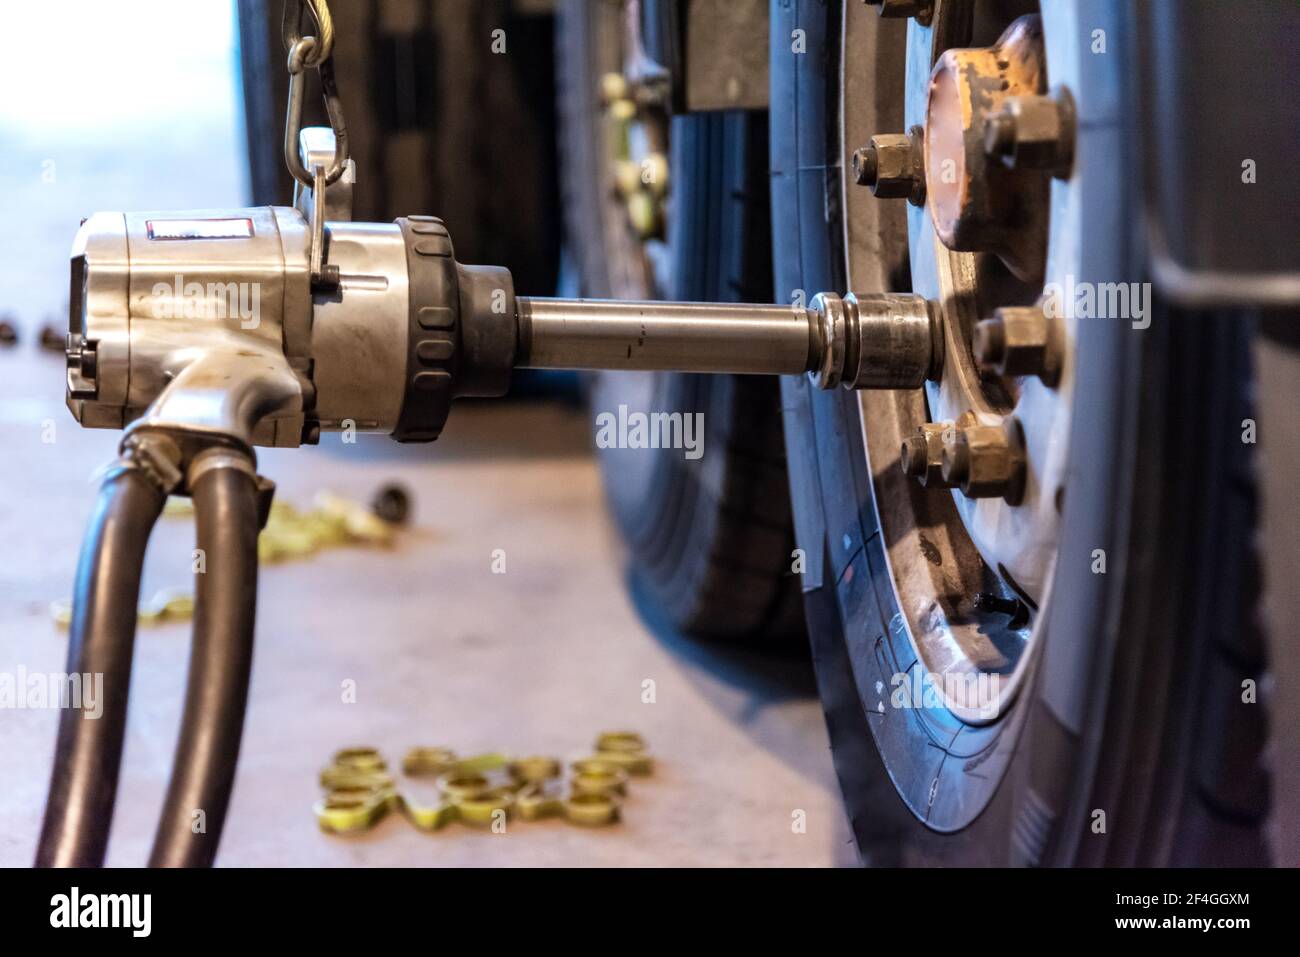 Pneumatic machine to tighten or loosen the lug nuts of a truck. Stock Photo